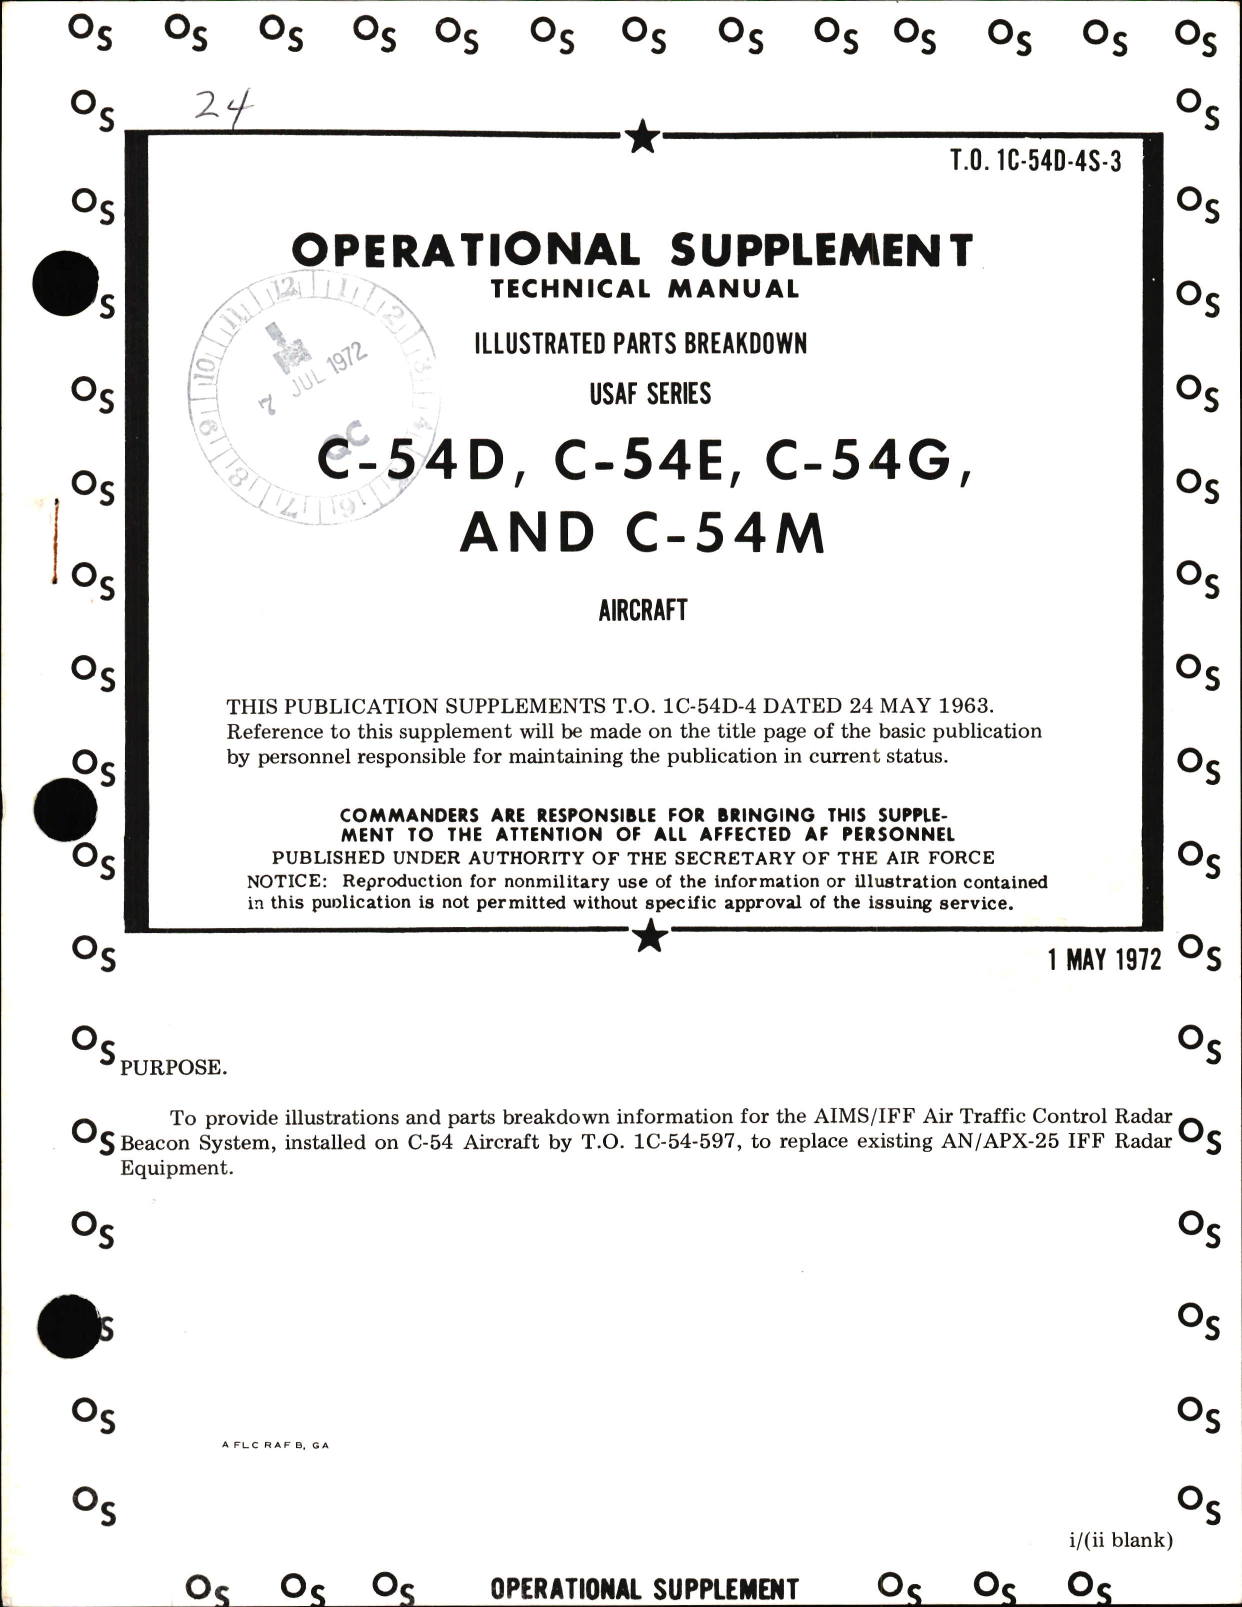 Sample page 1 from AirCorps Library document: Operational Supplement, Illustrated Parts Breakdown for C-54D, C-54E, C-54G, and C-54M